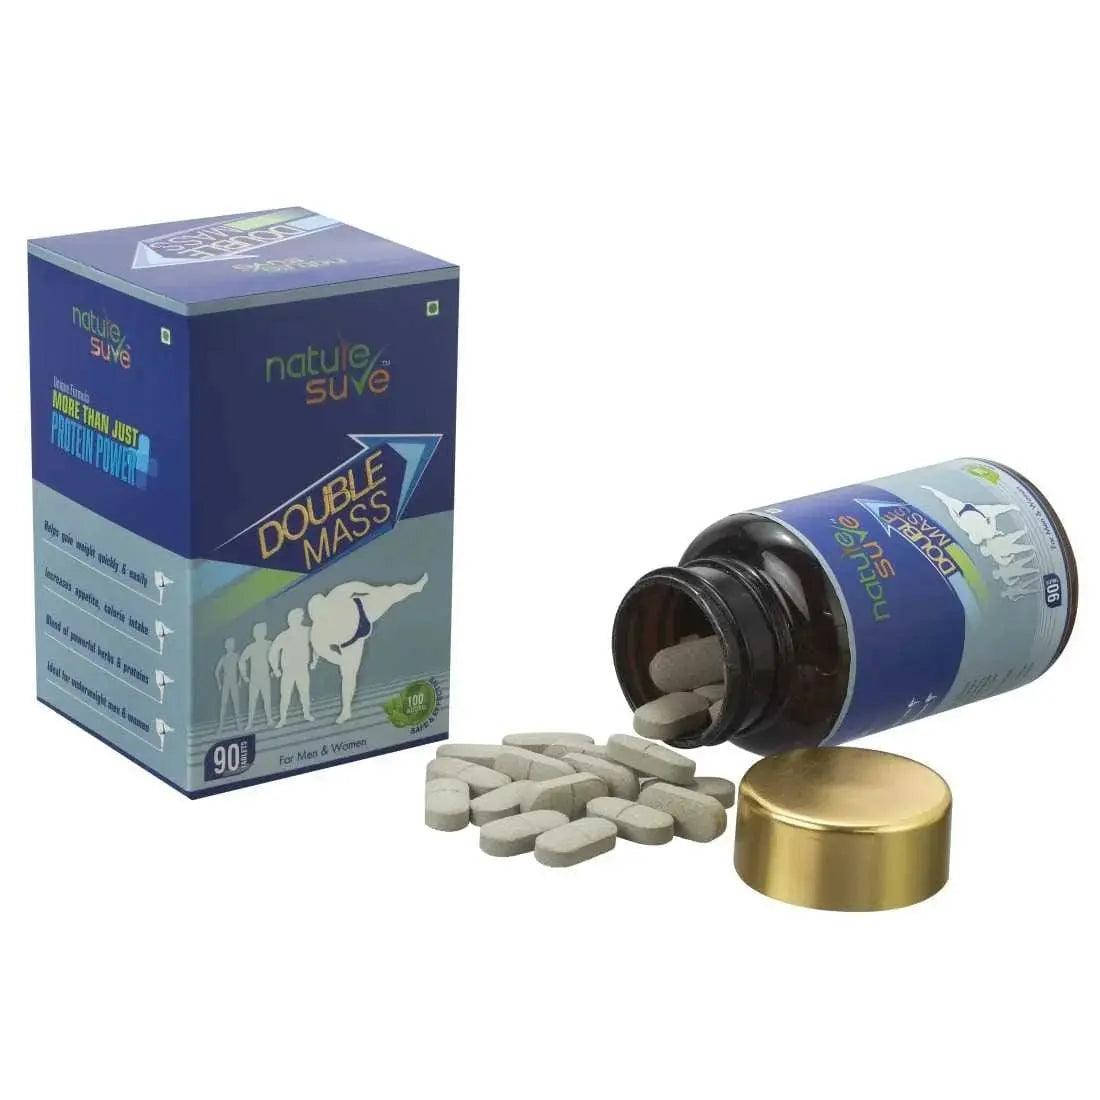 Nature Sure Double Mass Tablets for Men and Women (90 Tablets) 8906116280041